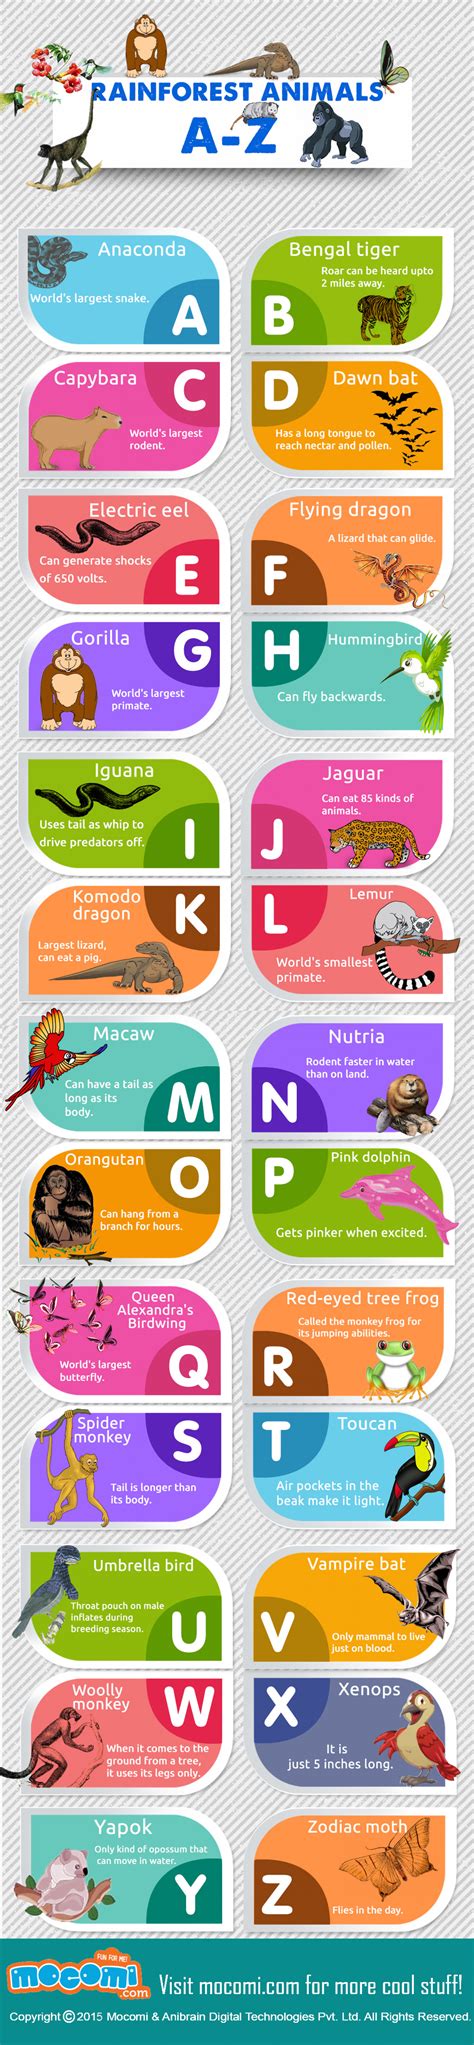 Perhaps…but not quite a correct name to use when describing africa's animals. Rainforest Animals A-Z | Visual.ly